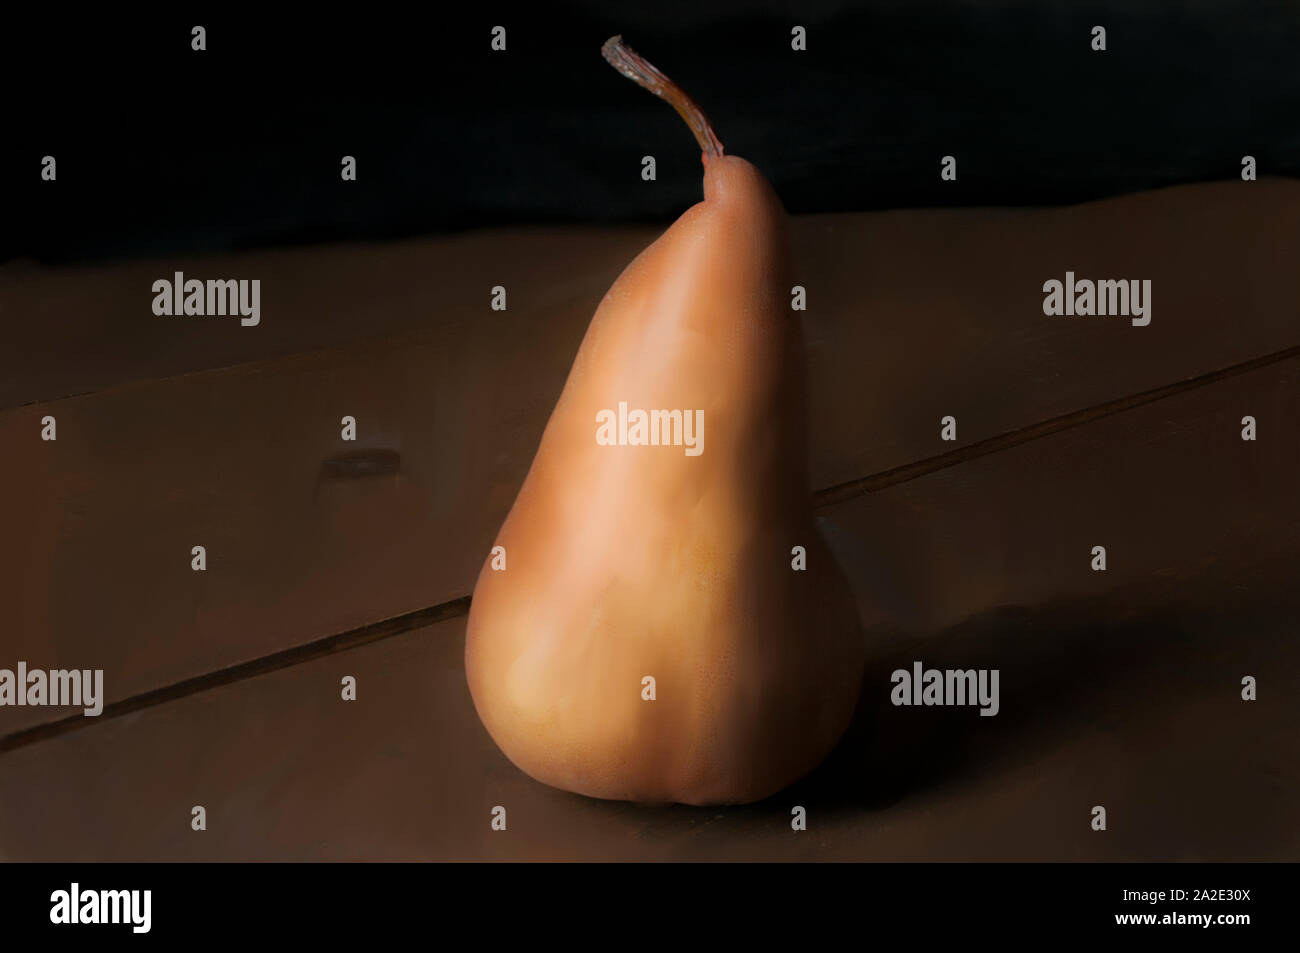 Still life single pear on a wooden rustic table in low key light dark food photography Stock Photo